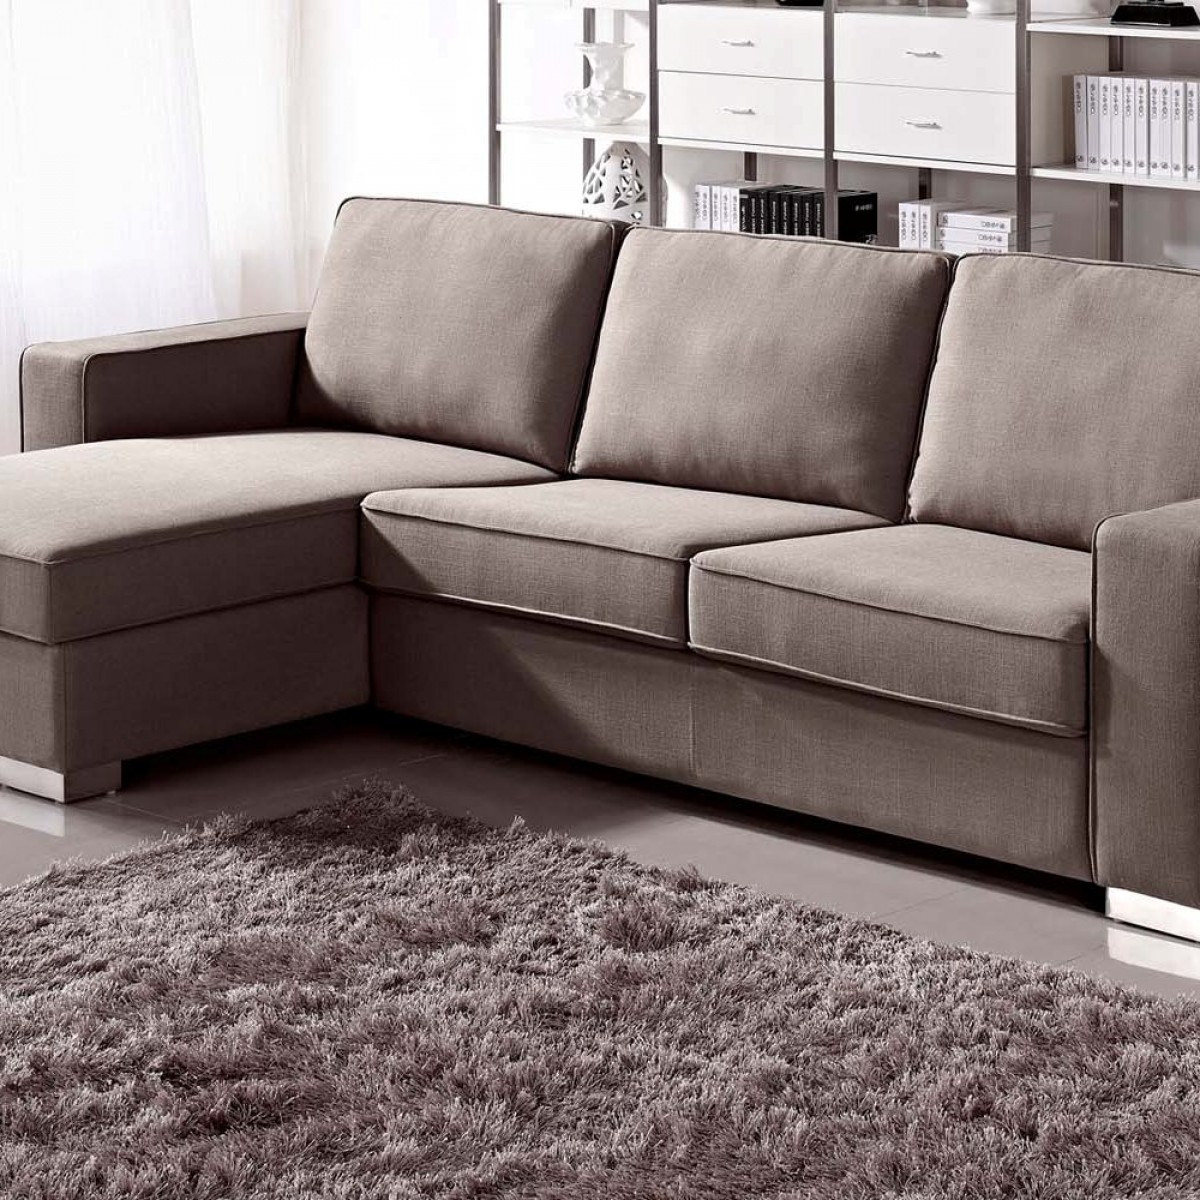 sectional sleeper sofa with chaise photo - 9